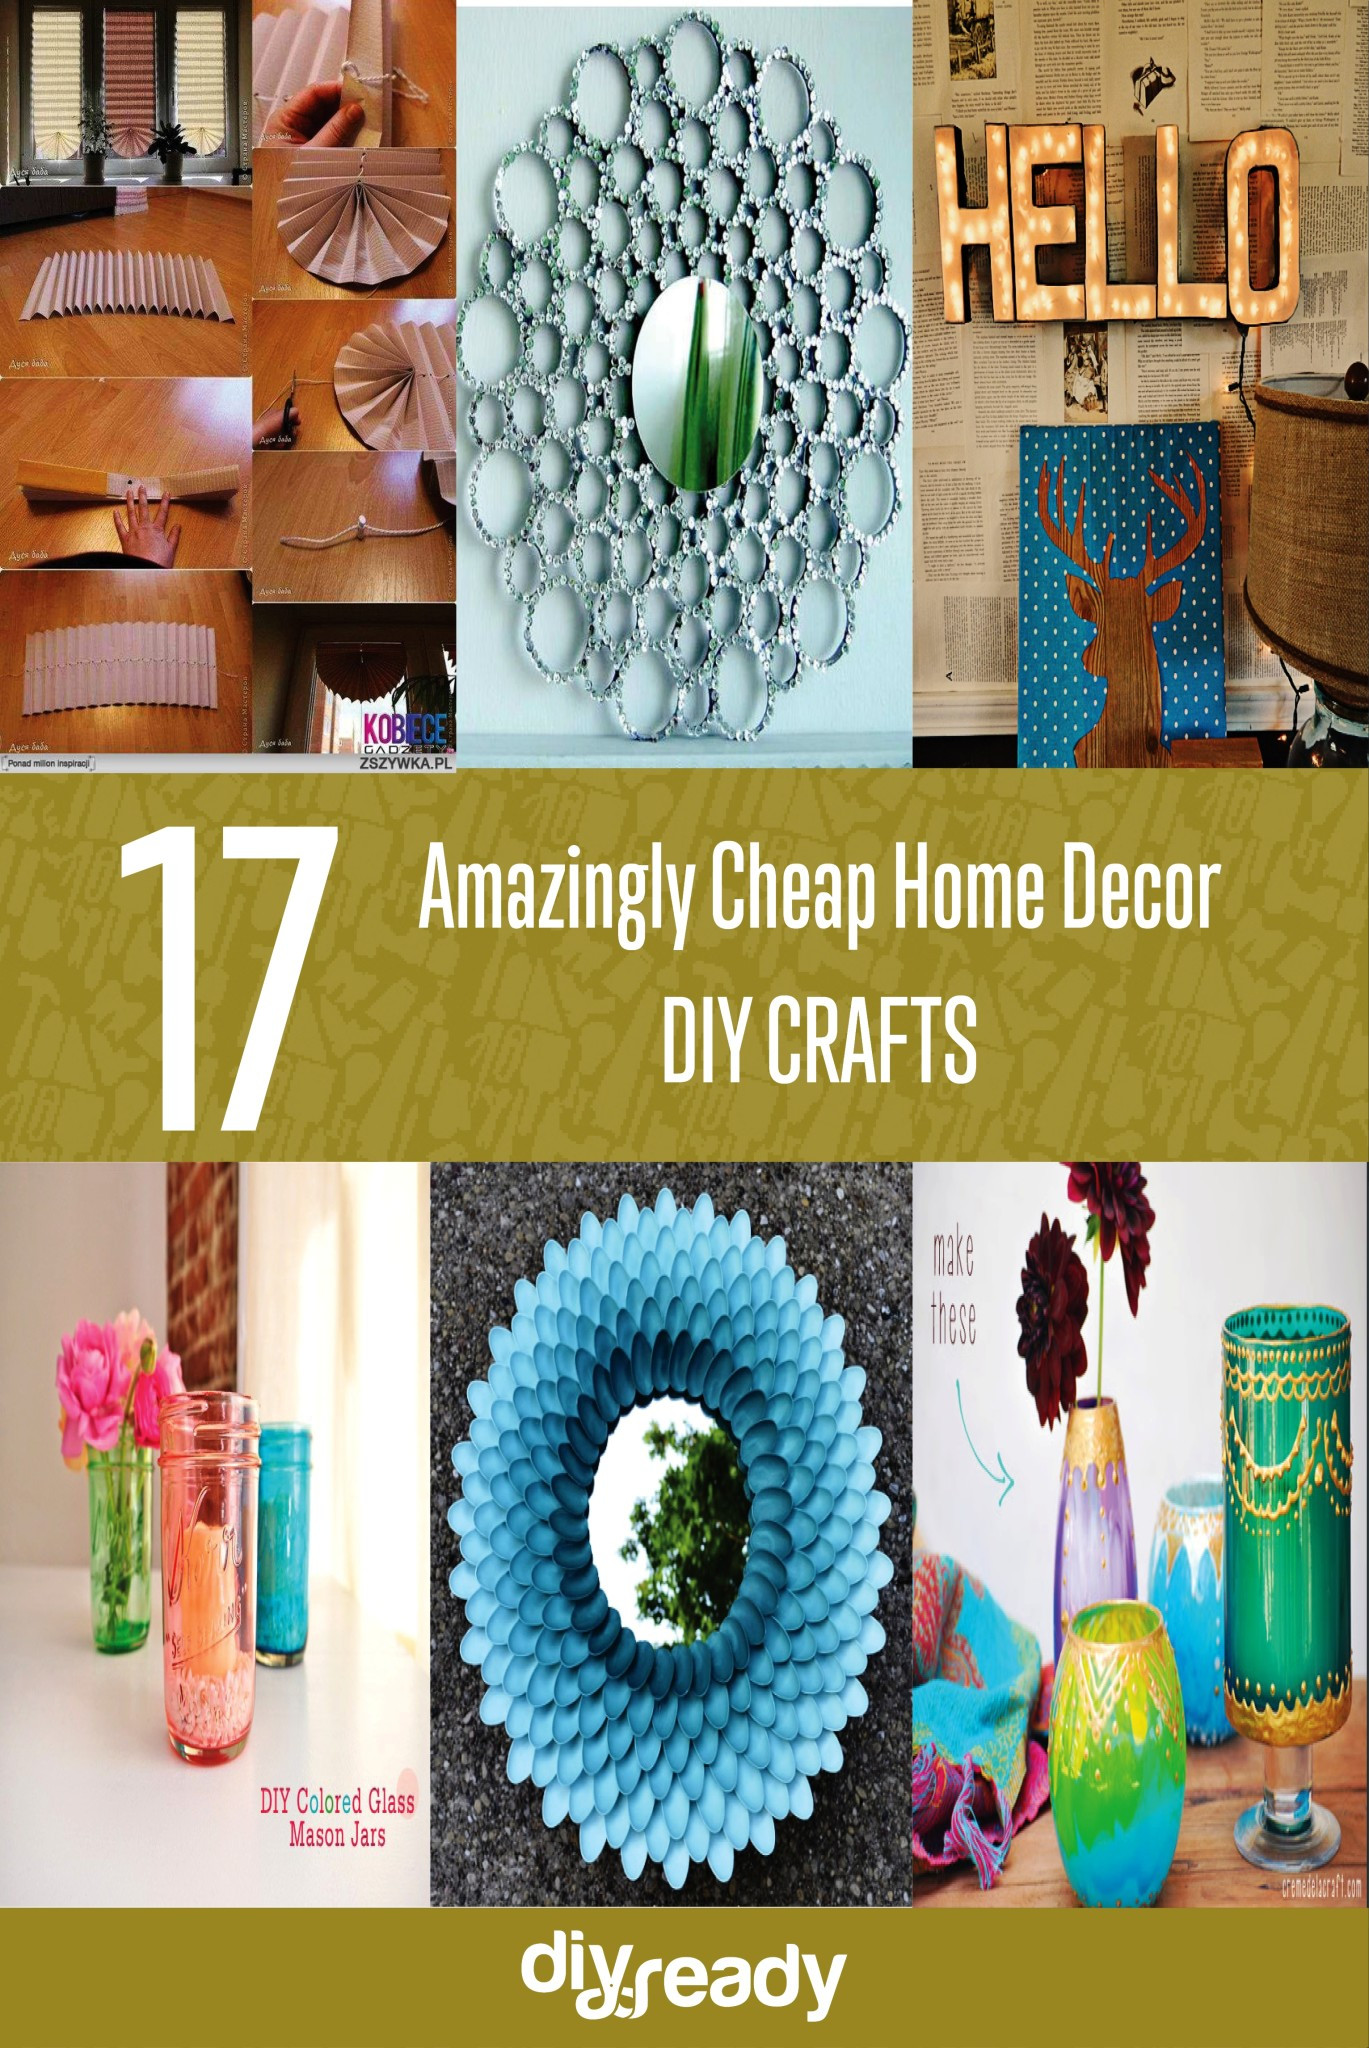 Craft Ideas For Home Decor
 Cheap Home Decor Ideas DIY Projects Craft Ideas & How To’s